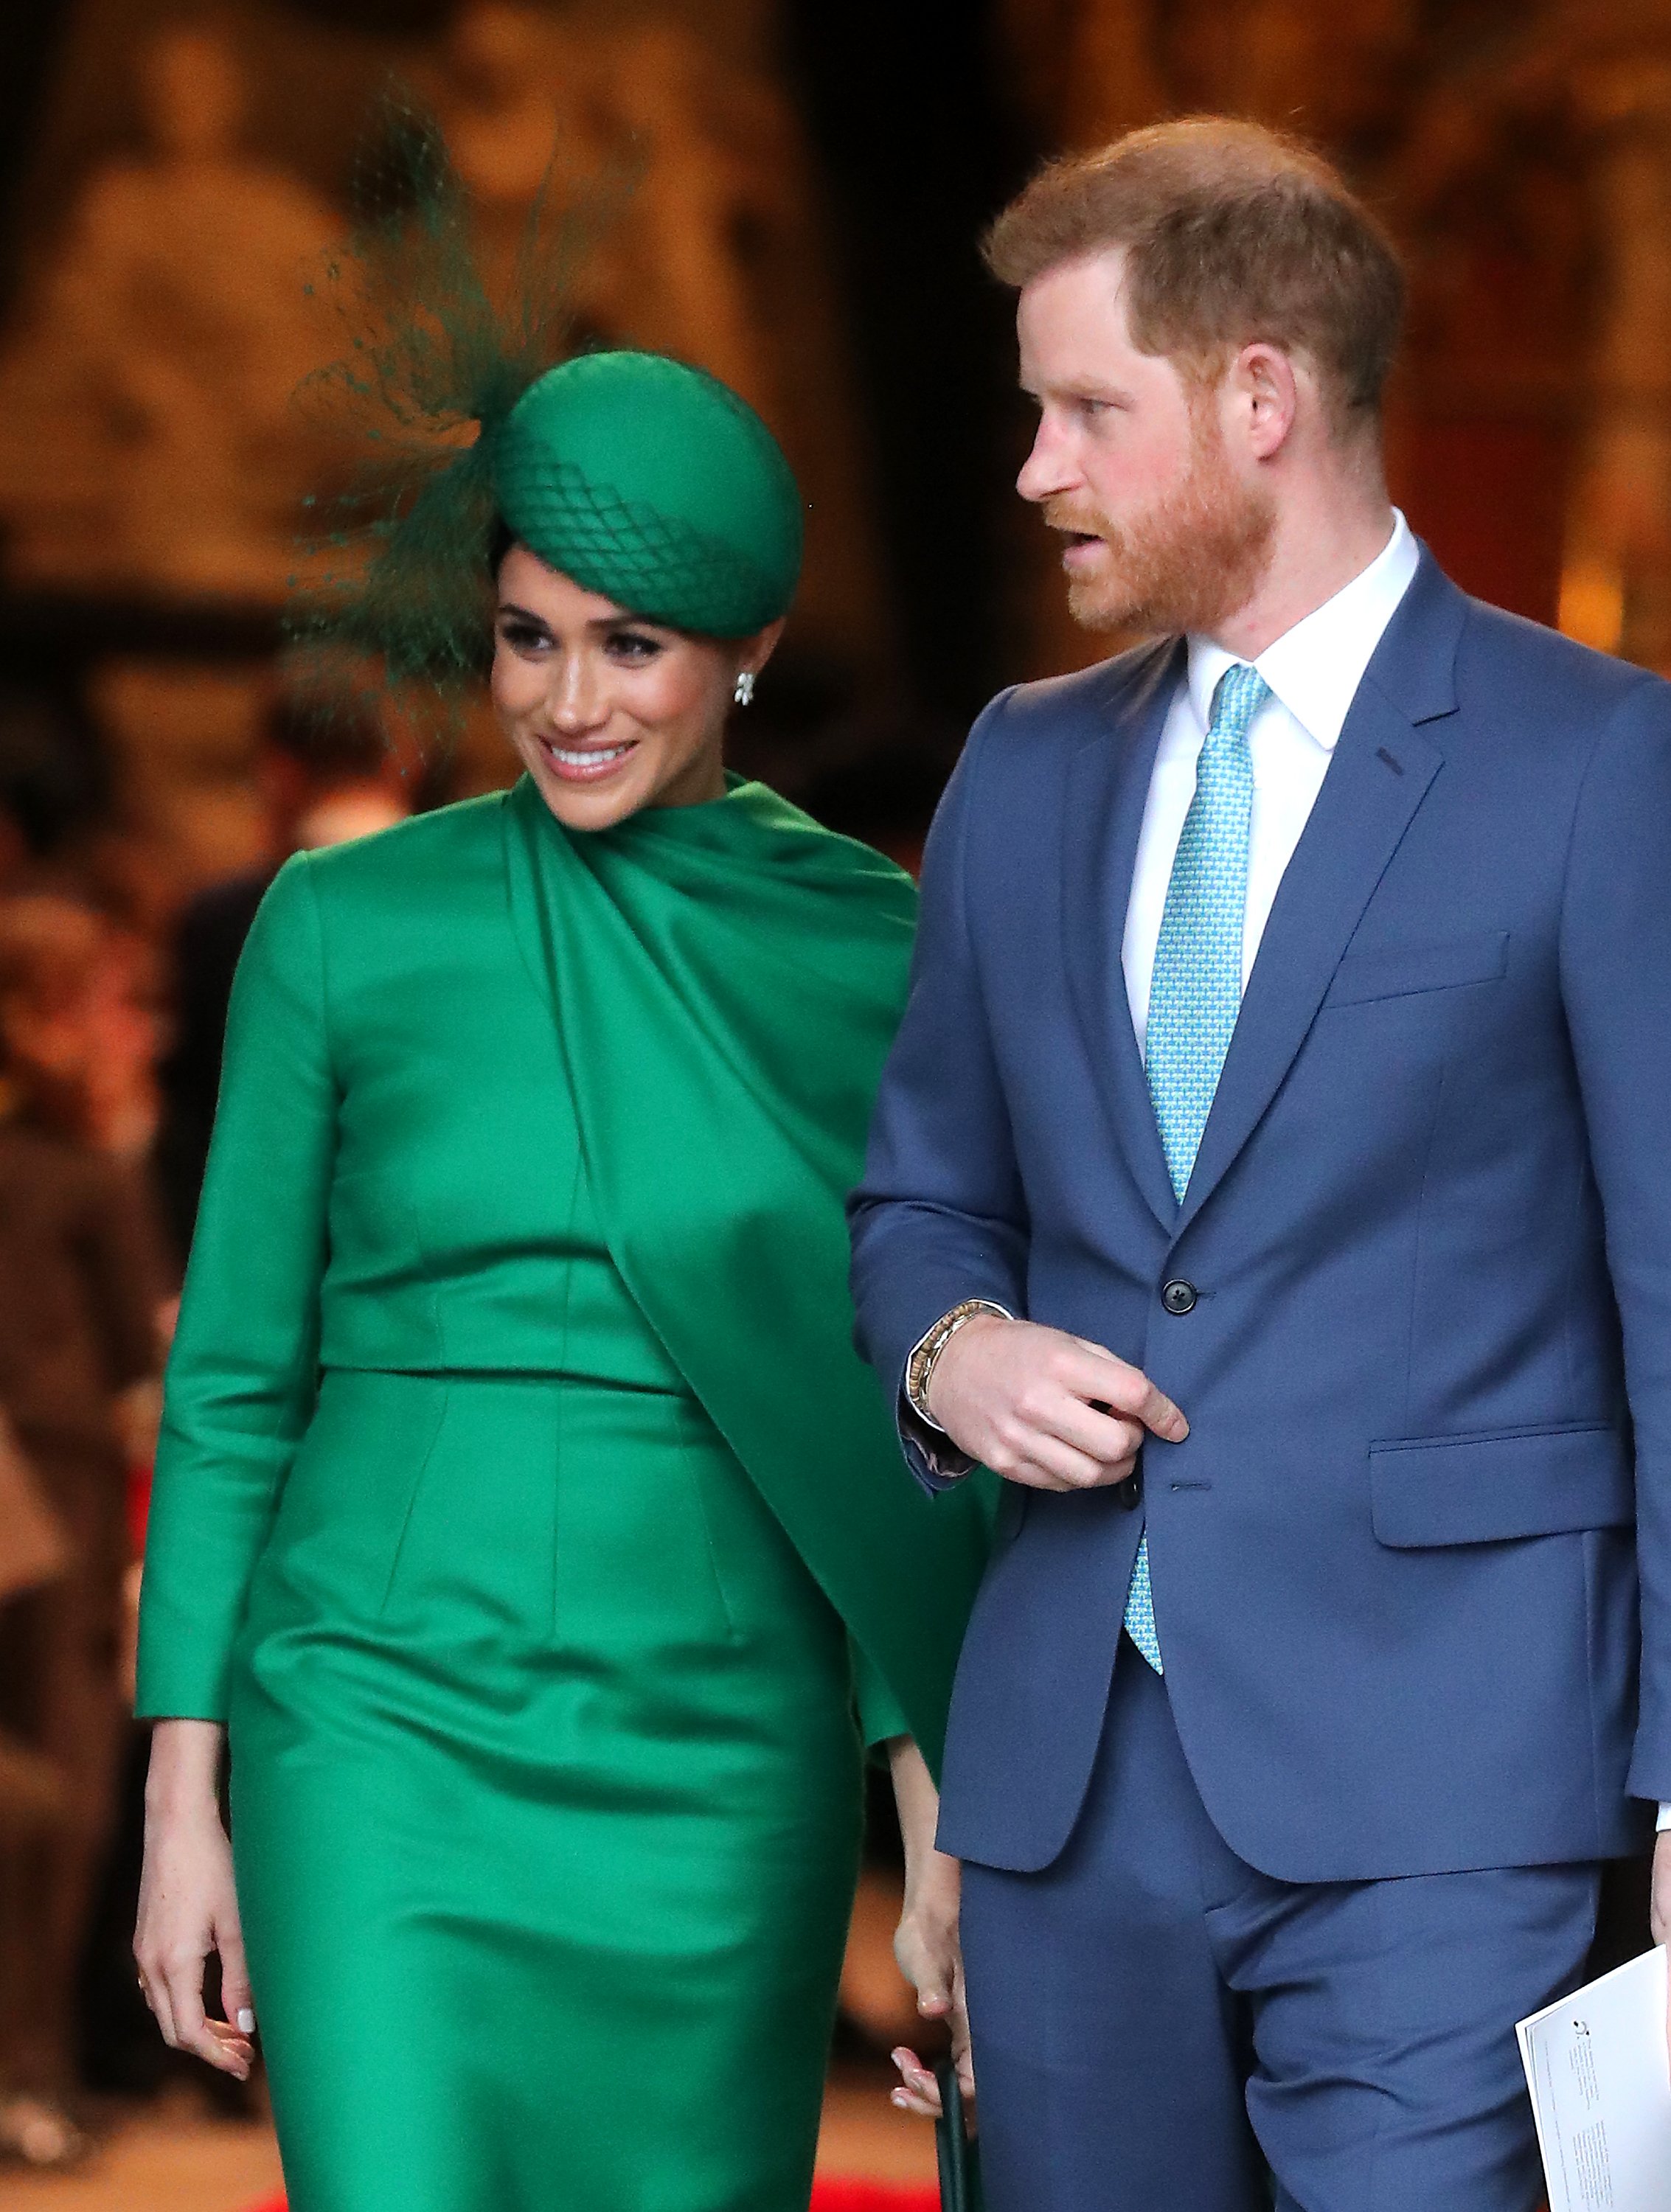 Prince Harry, Duke of Sussex and Meghan, Duchess of Sussex meets children as she attends the Commonwealth Day Service 2020 on March 09, 2020 in London, England. | Source: Getty Images